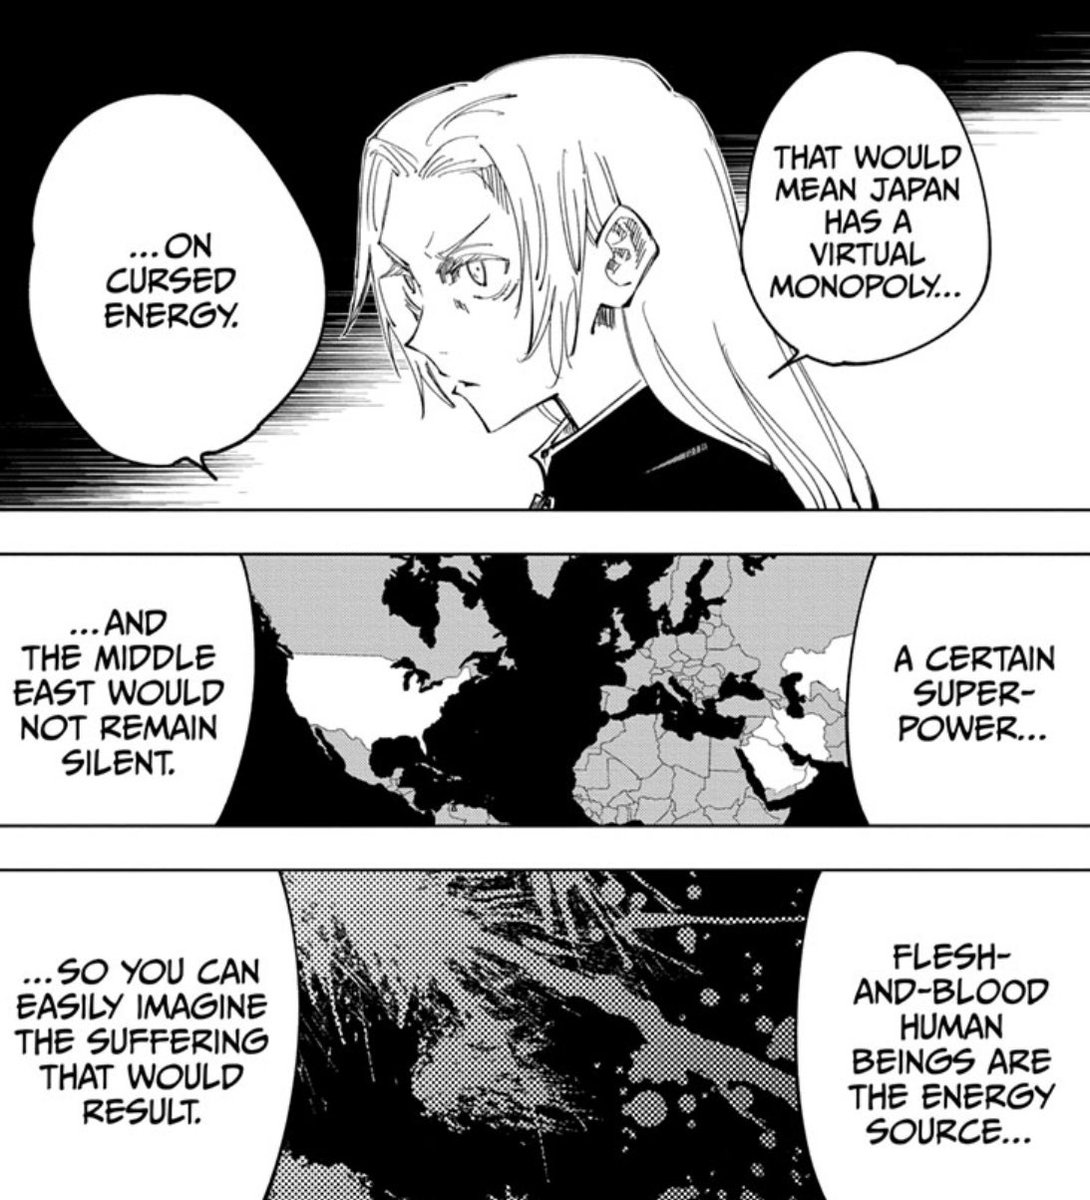 Can you imagine if Gege had decided to go worldwide with Jujutsu Kaisen’s world building?

Imagine each big country had a special grade or two!

Or special grade curses from other nations like the boogyman, Cathulu, Zeus, etc

Sorcerers and curse users from all over the world 👀